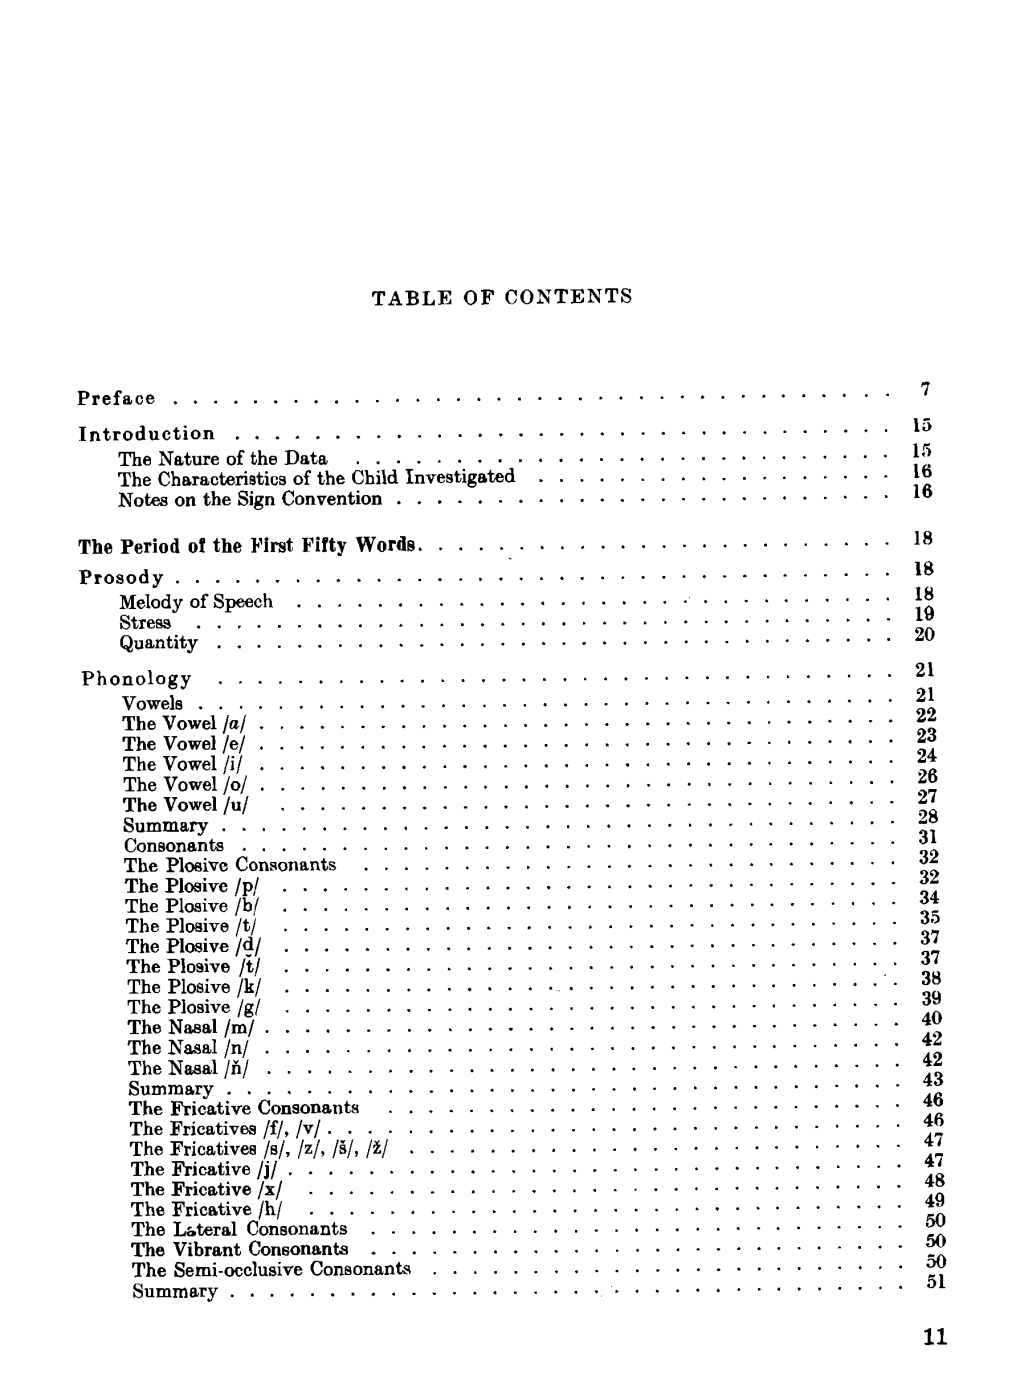 TABLE of CONTENTS Preface Introduction the Nature of the Data